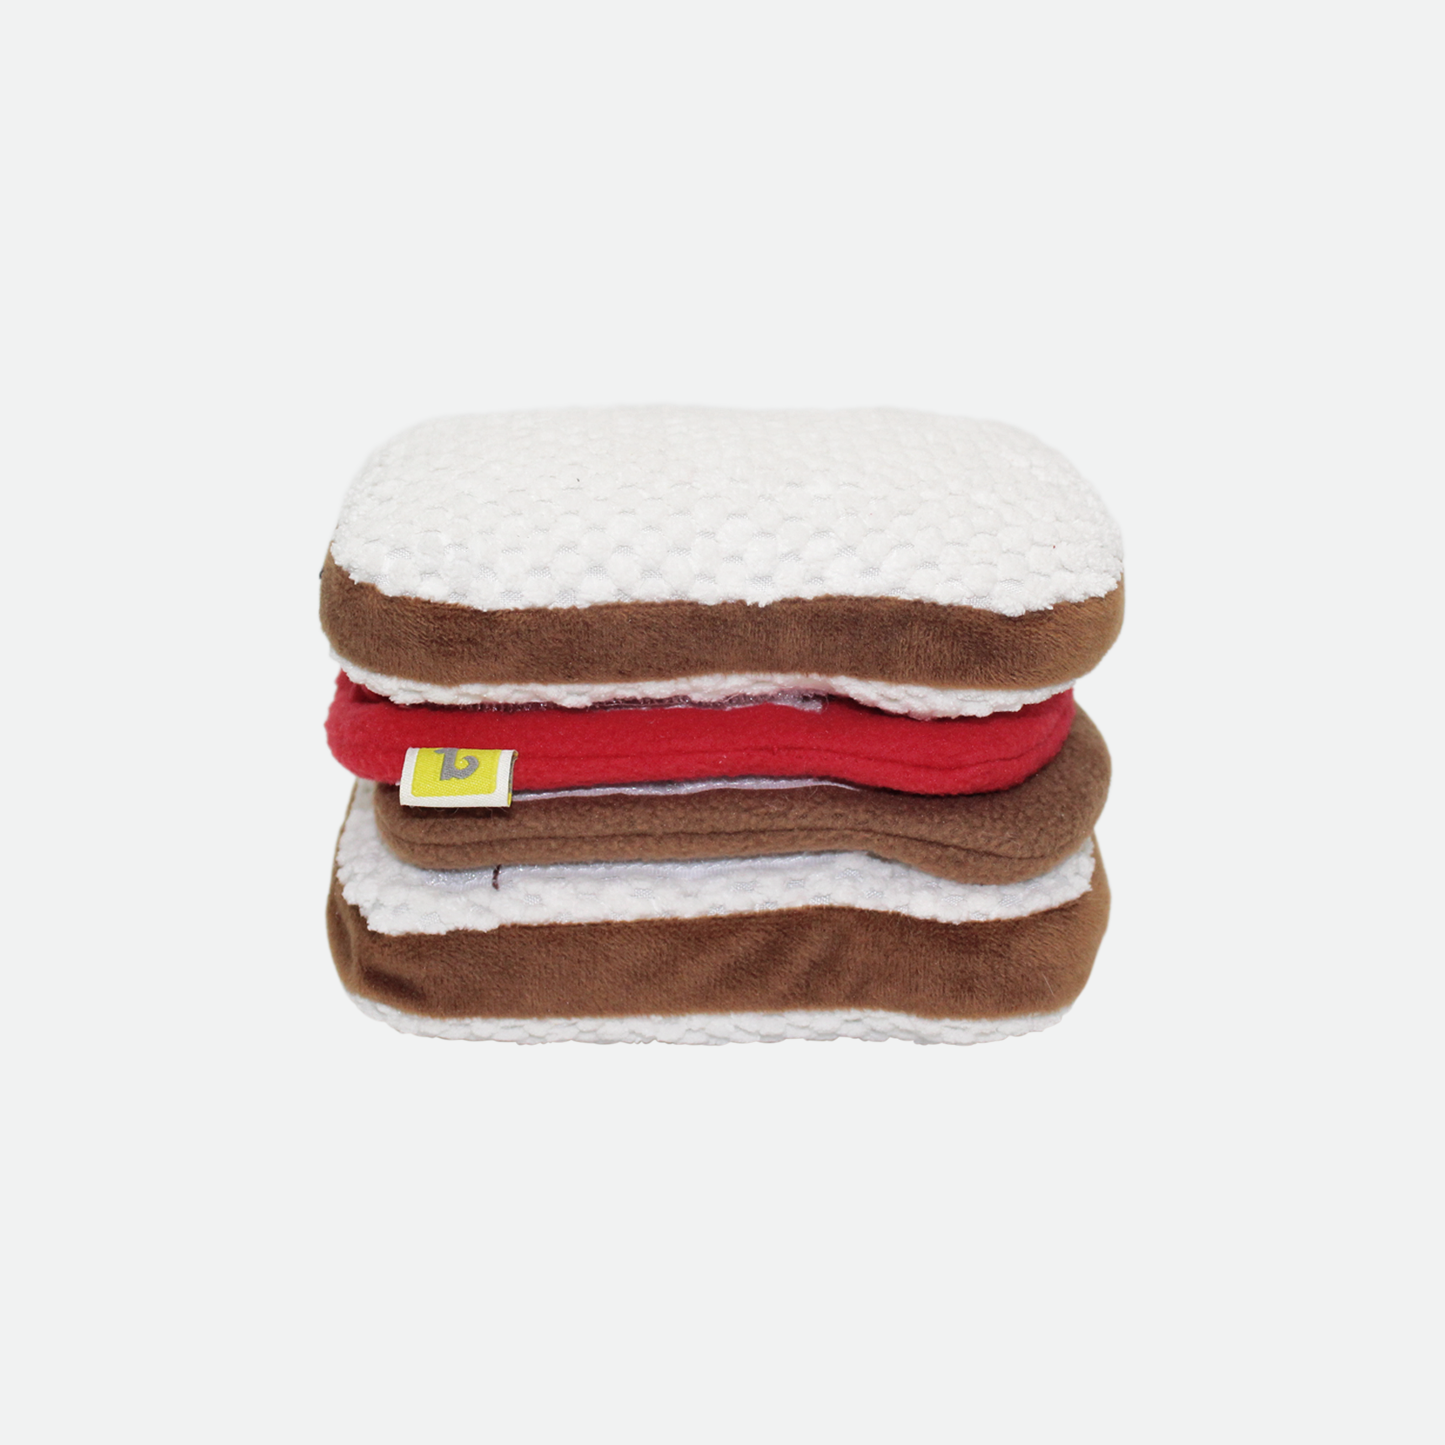 Plush toy for dog, sandwich style